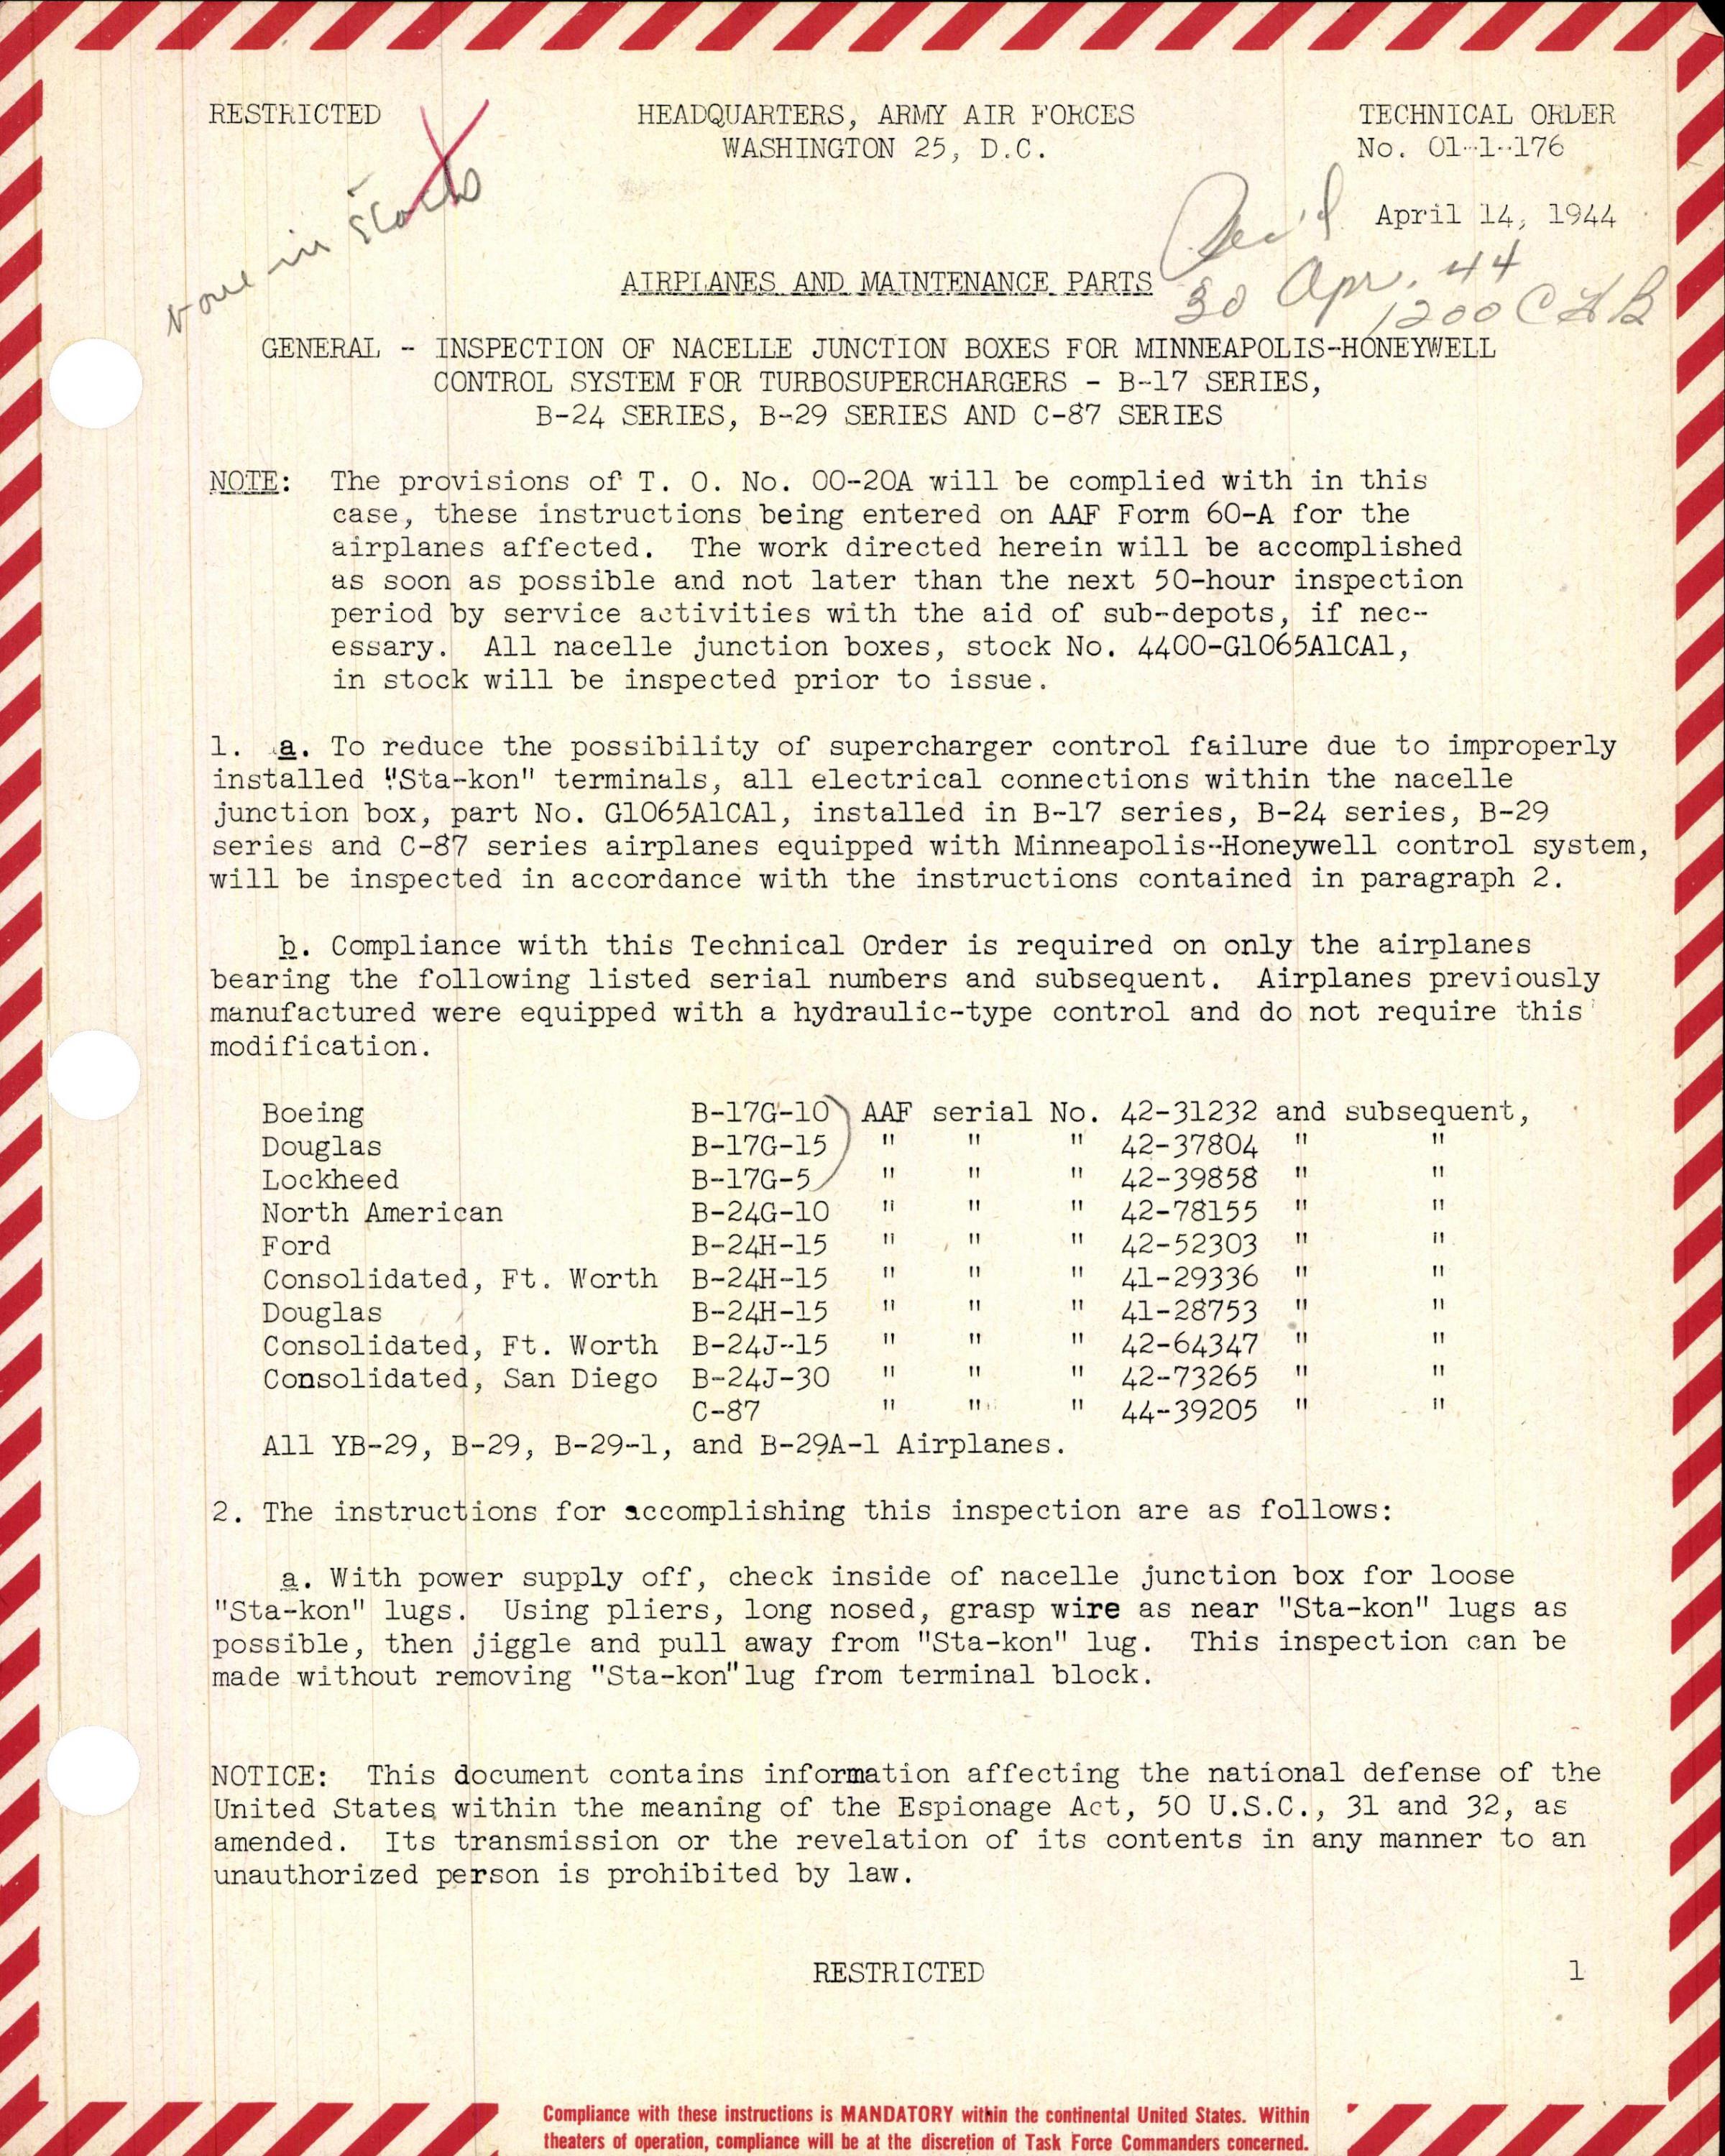 Sample page 1 from AirCorps Library document: Inspection of Nacelle Junction Boxes for Minneapolis-Honeywell Control System for Turbosuperchargers 